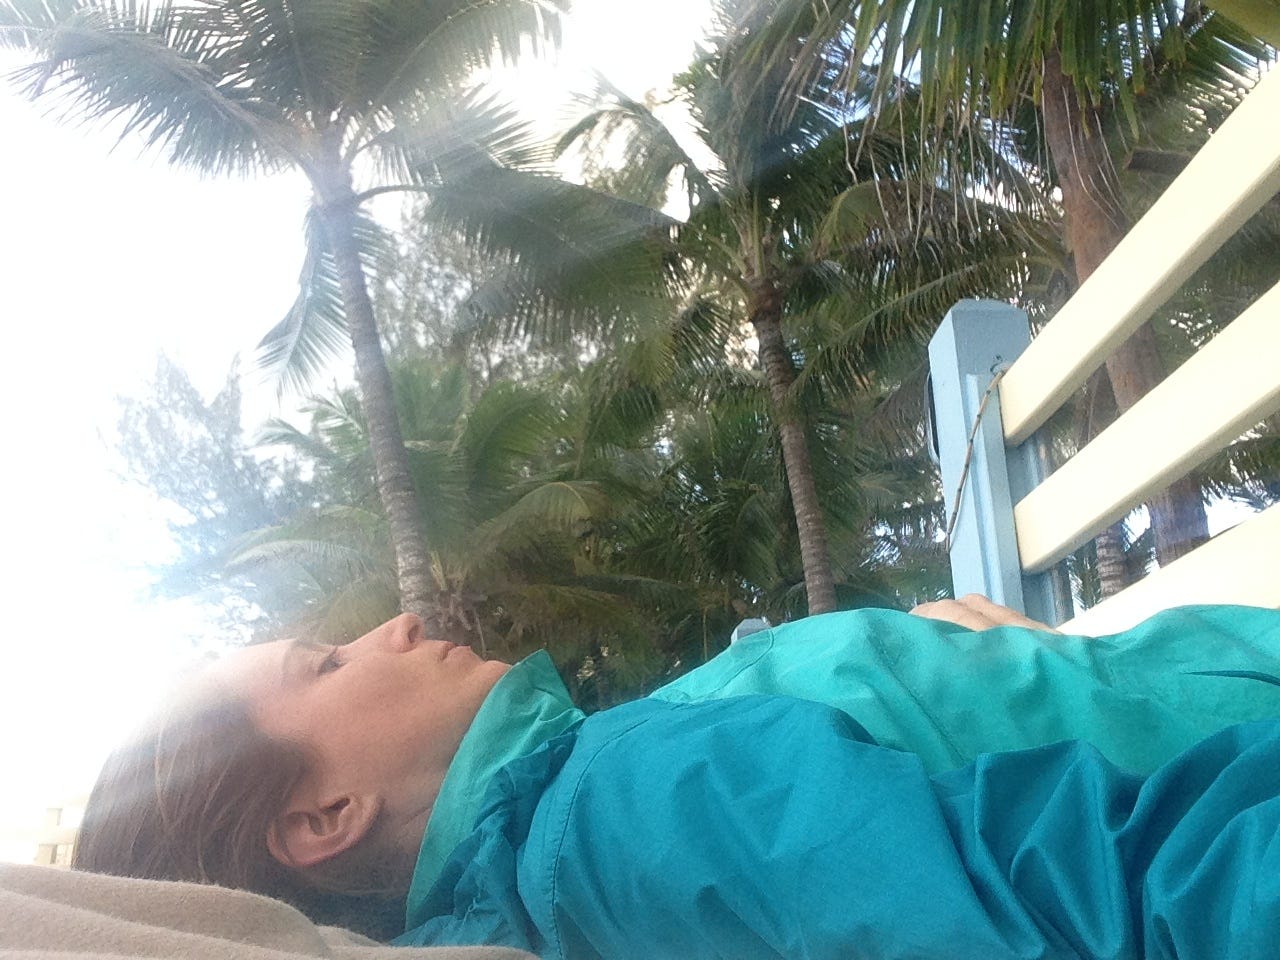 photo of author lying on the yoga platform with palm trees above her. she is wearing a jacket zipped all the way up